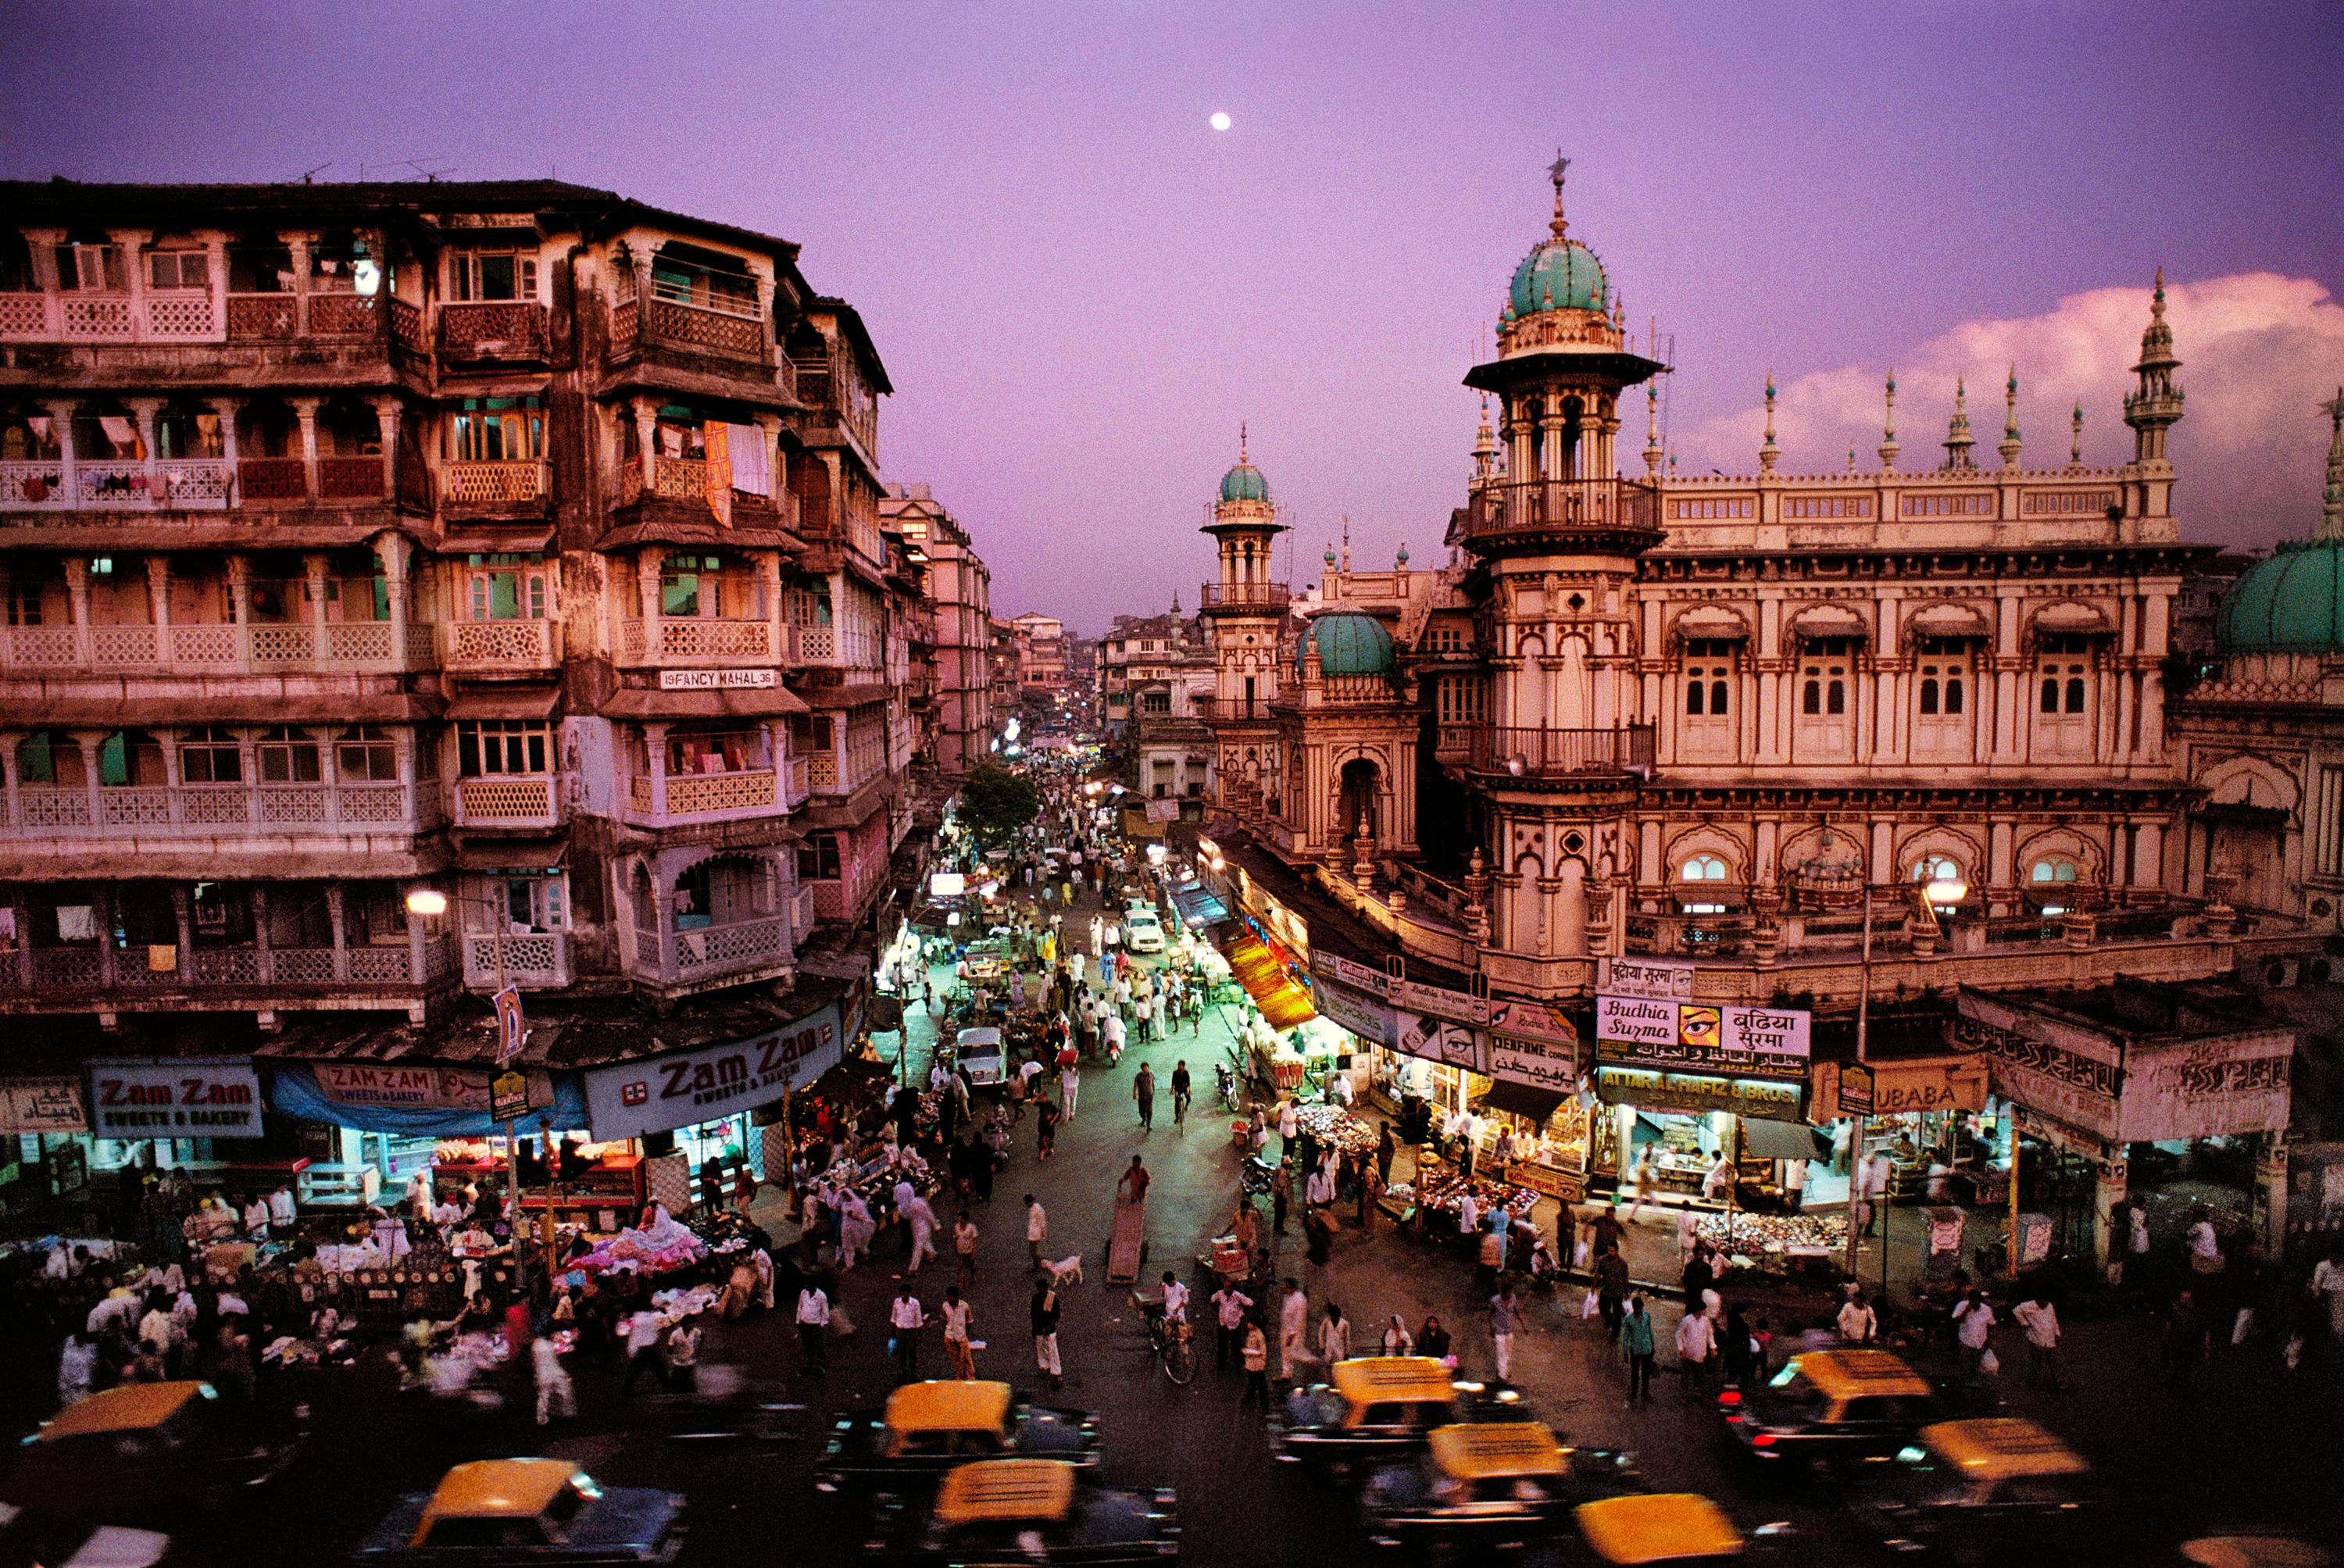 Steve McCurry
Moonrise in Mumbai, 1994	
C-print		
20x24 inches	
Edition of 30

Also available in
30x40 edition of 15
40x60 edition of 10 